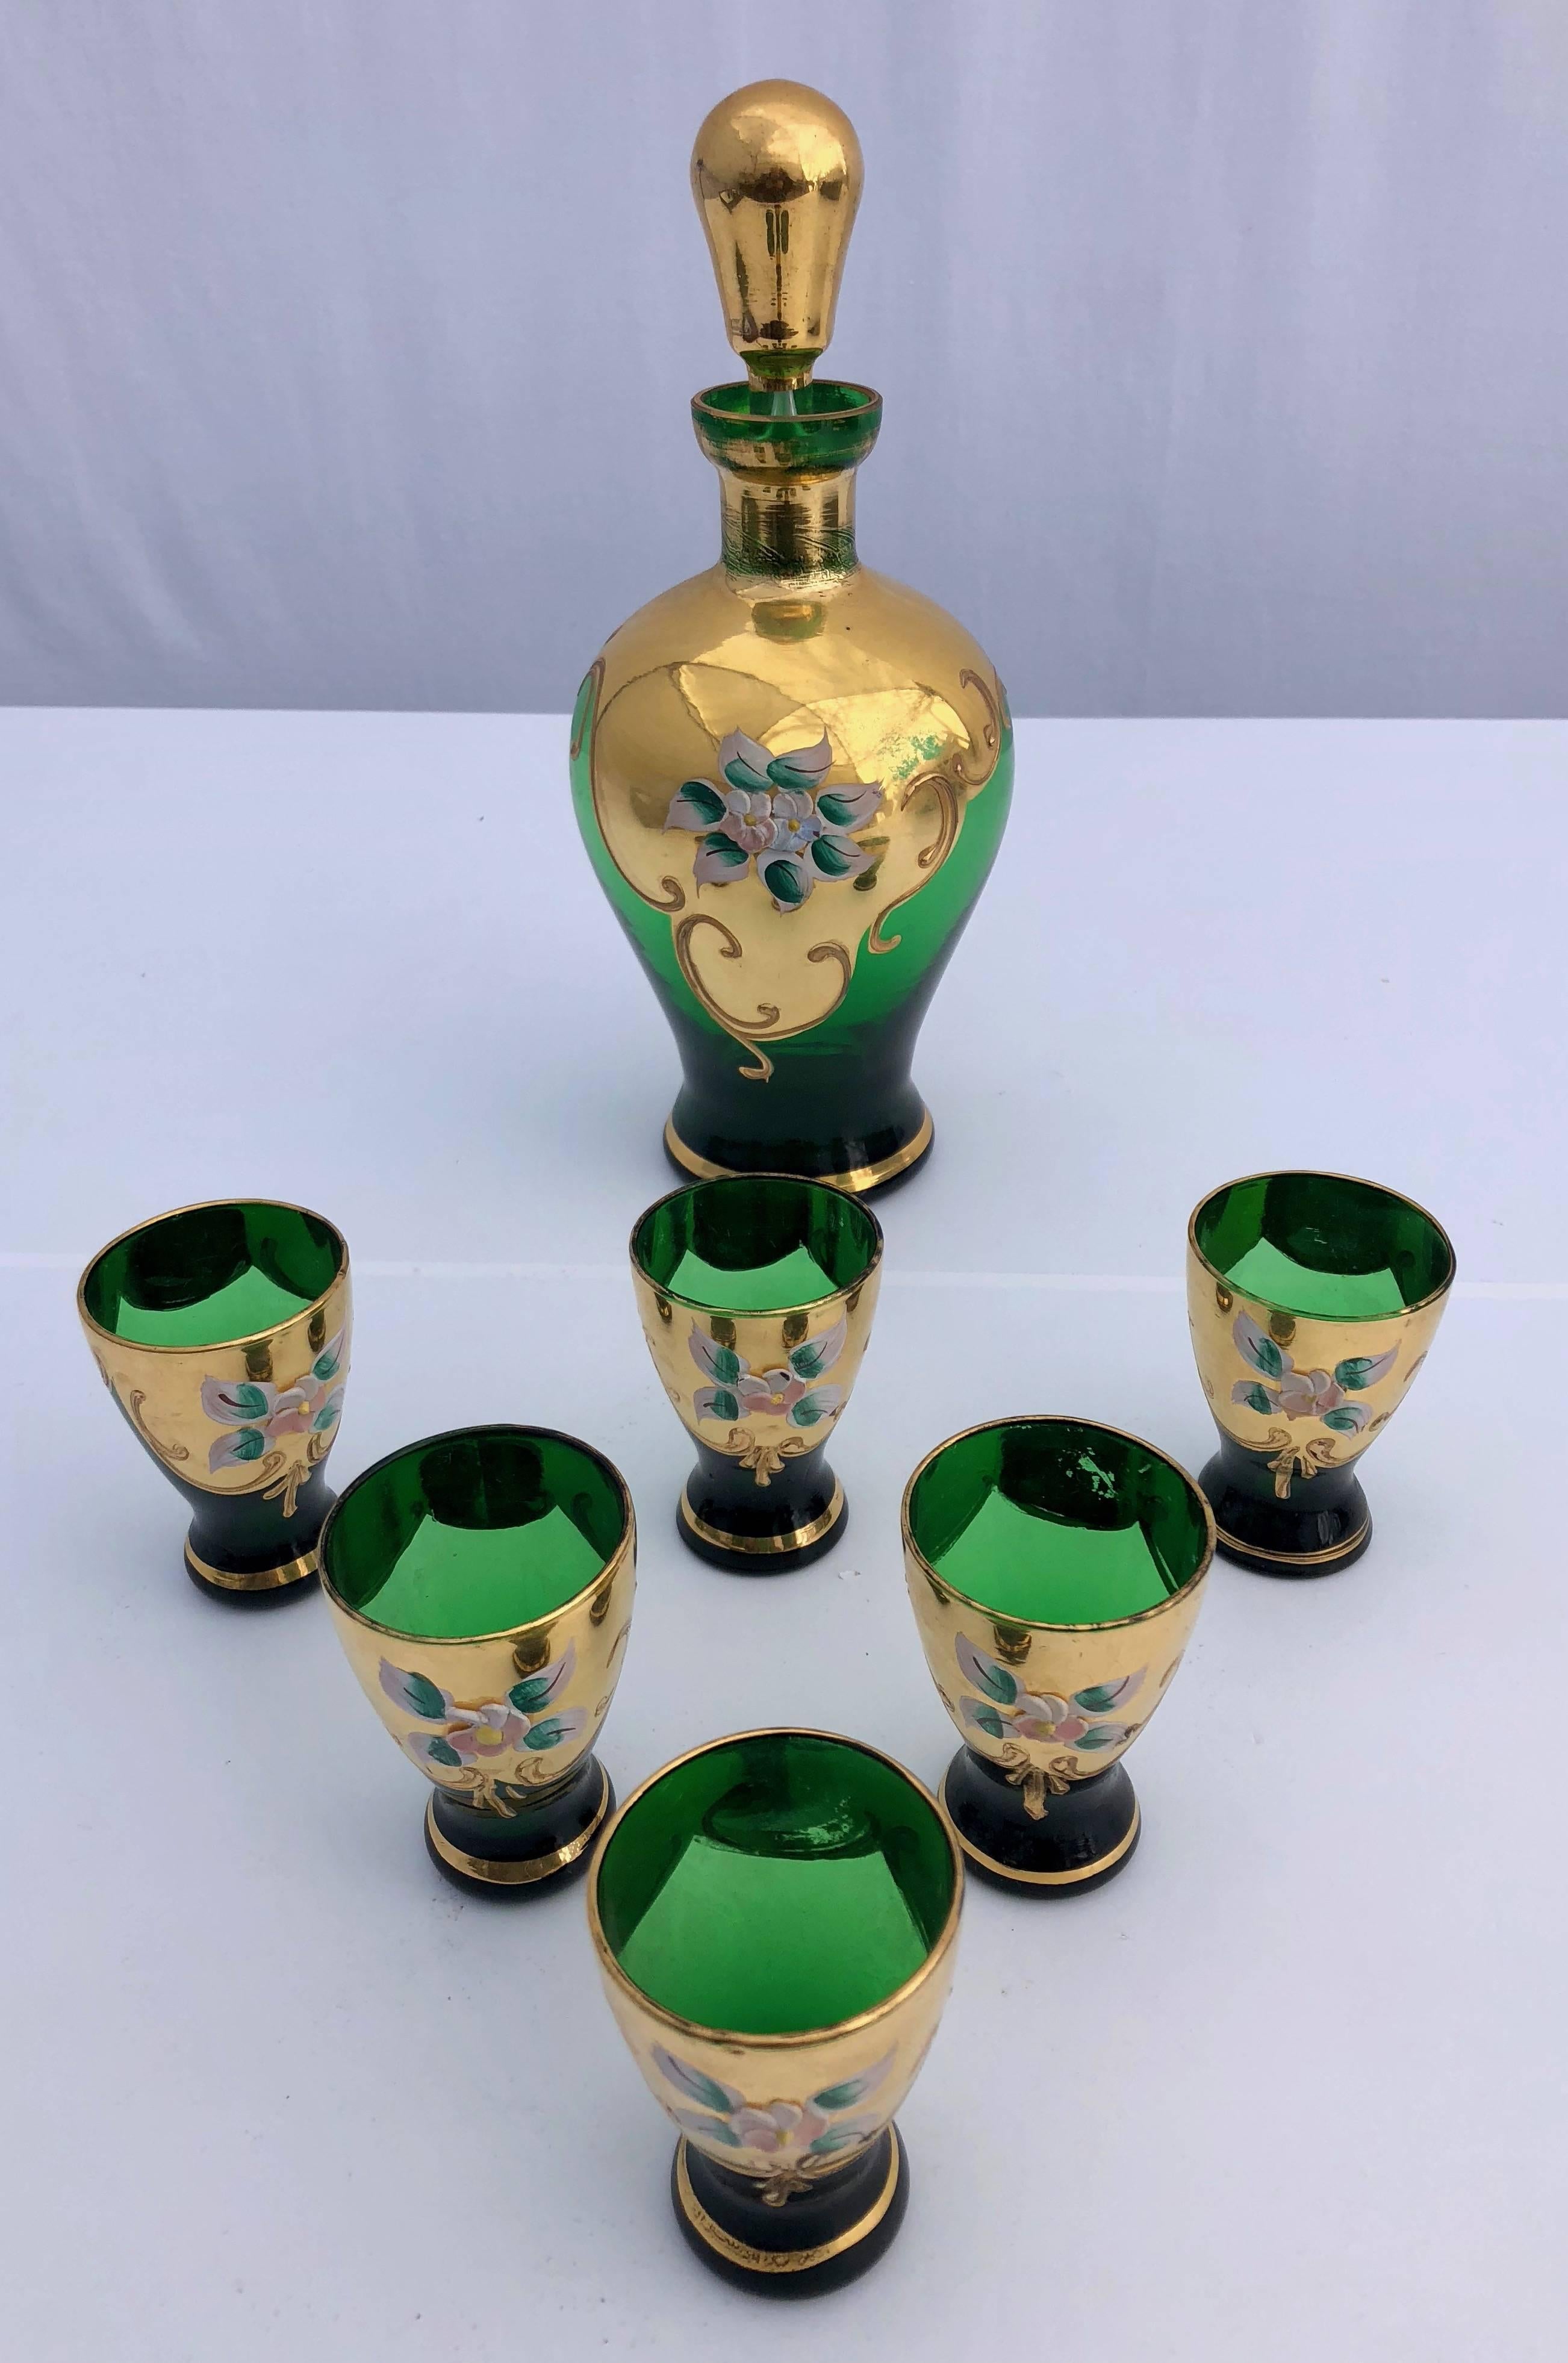 This gorgeous handblown, hand-painted French Lorraine enameled liquor set include a carafe, with its beautiful gold stopper, and six small glasses. The emerald green color is exquisite and enhanced with hand painted gold enamel and flowers. It is